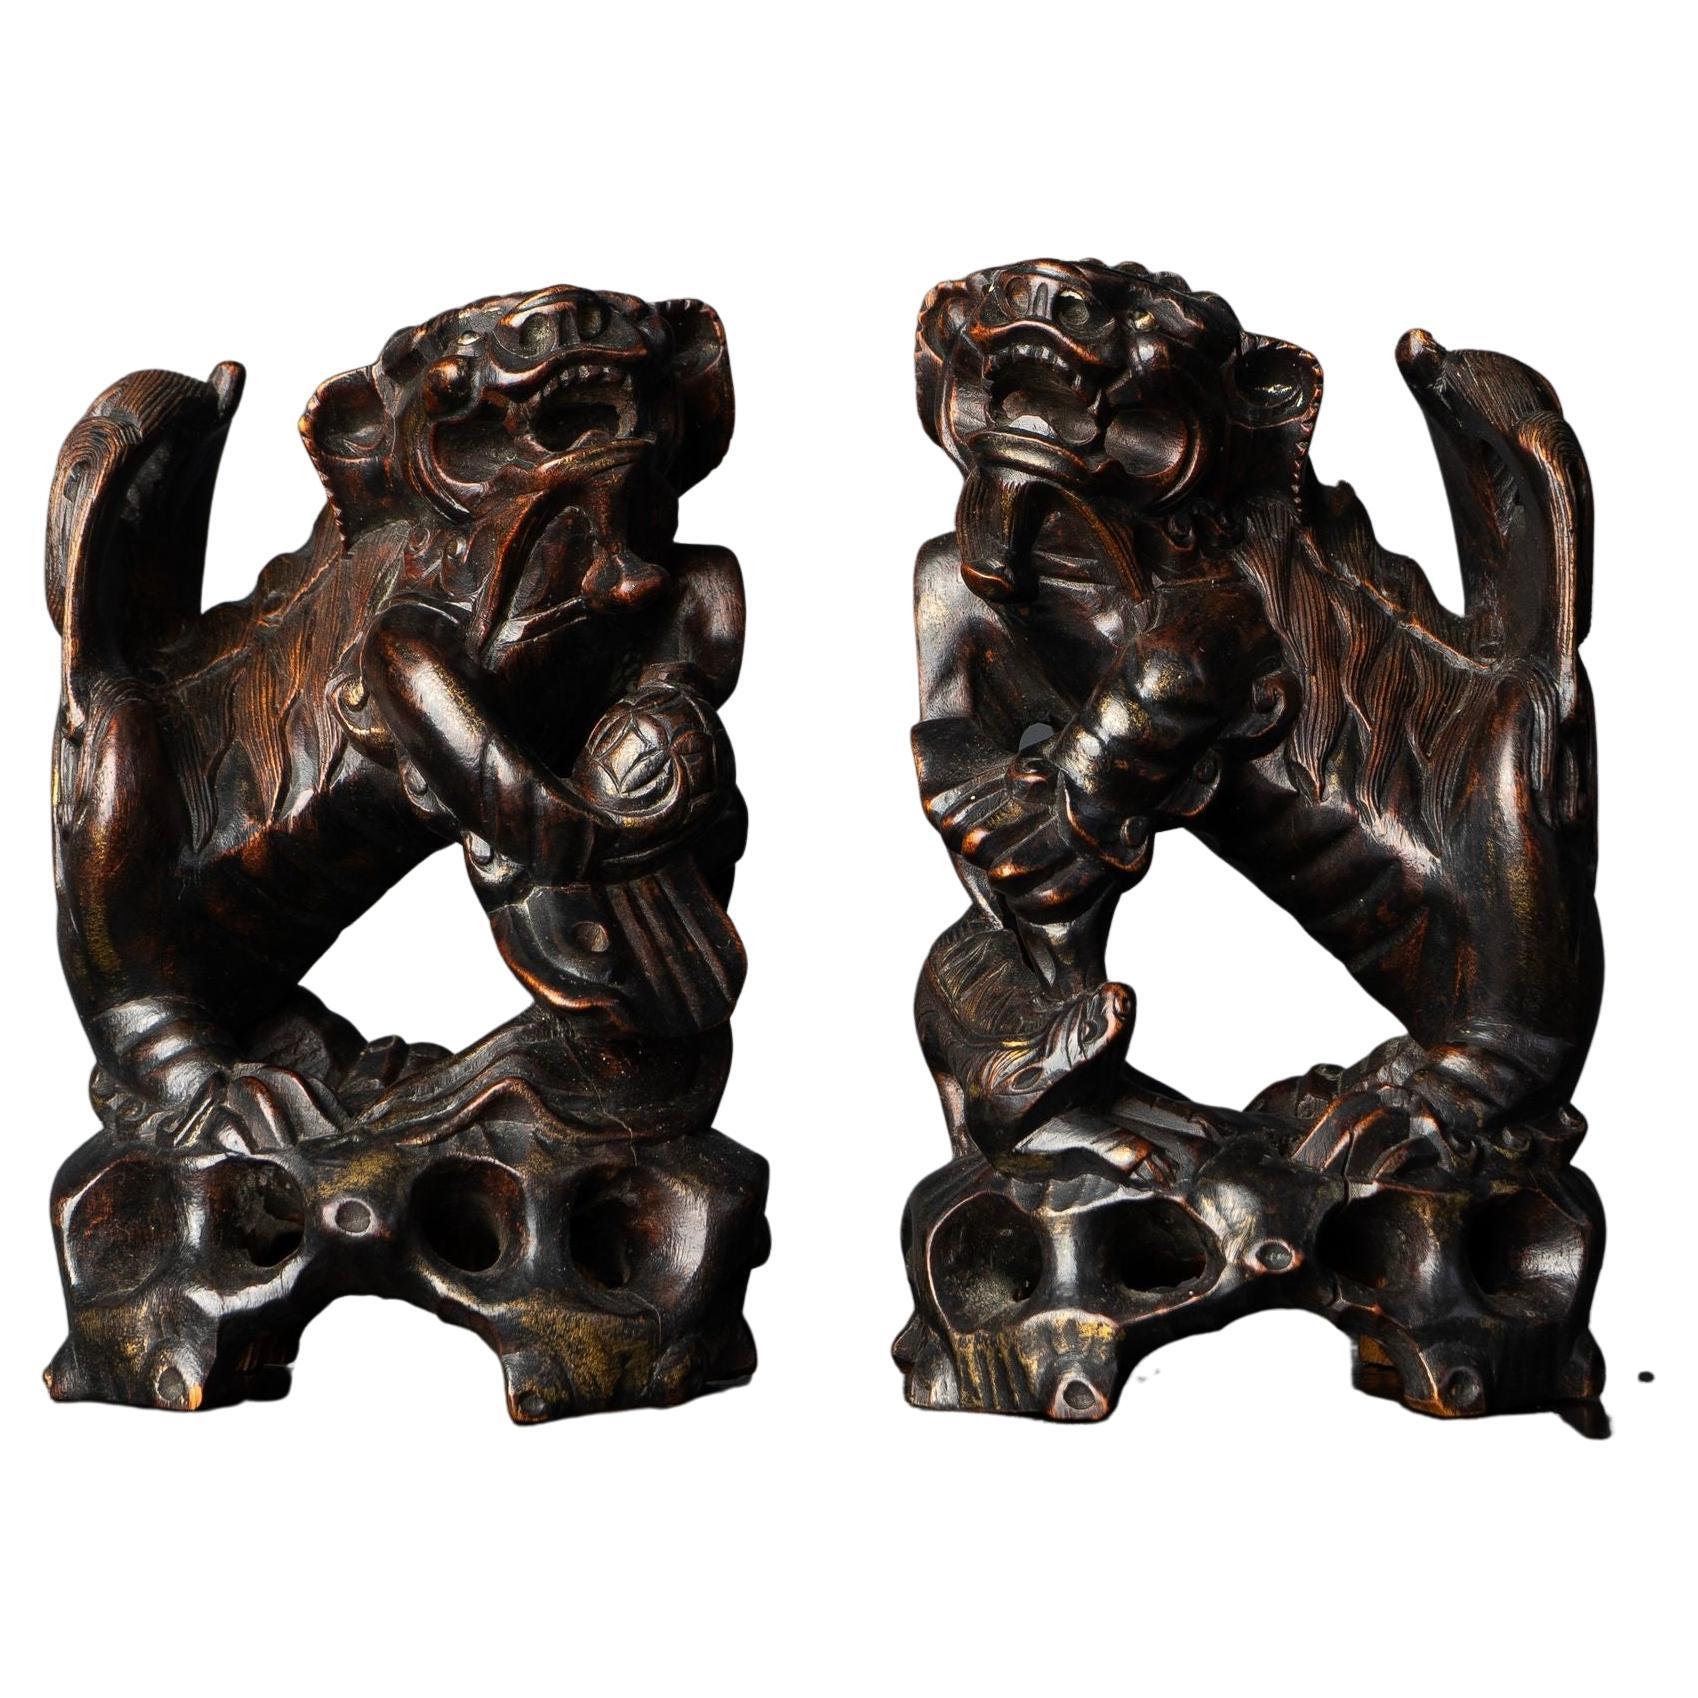 Pair of Antique Chinese Carved Wooden Foo Dogs or Guardian Lion Statues, Qing